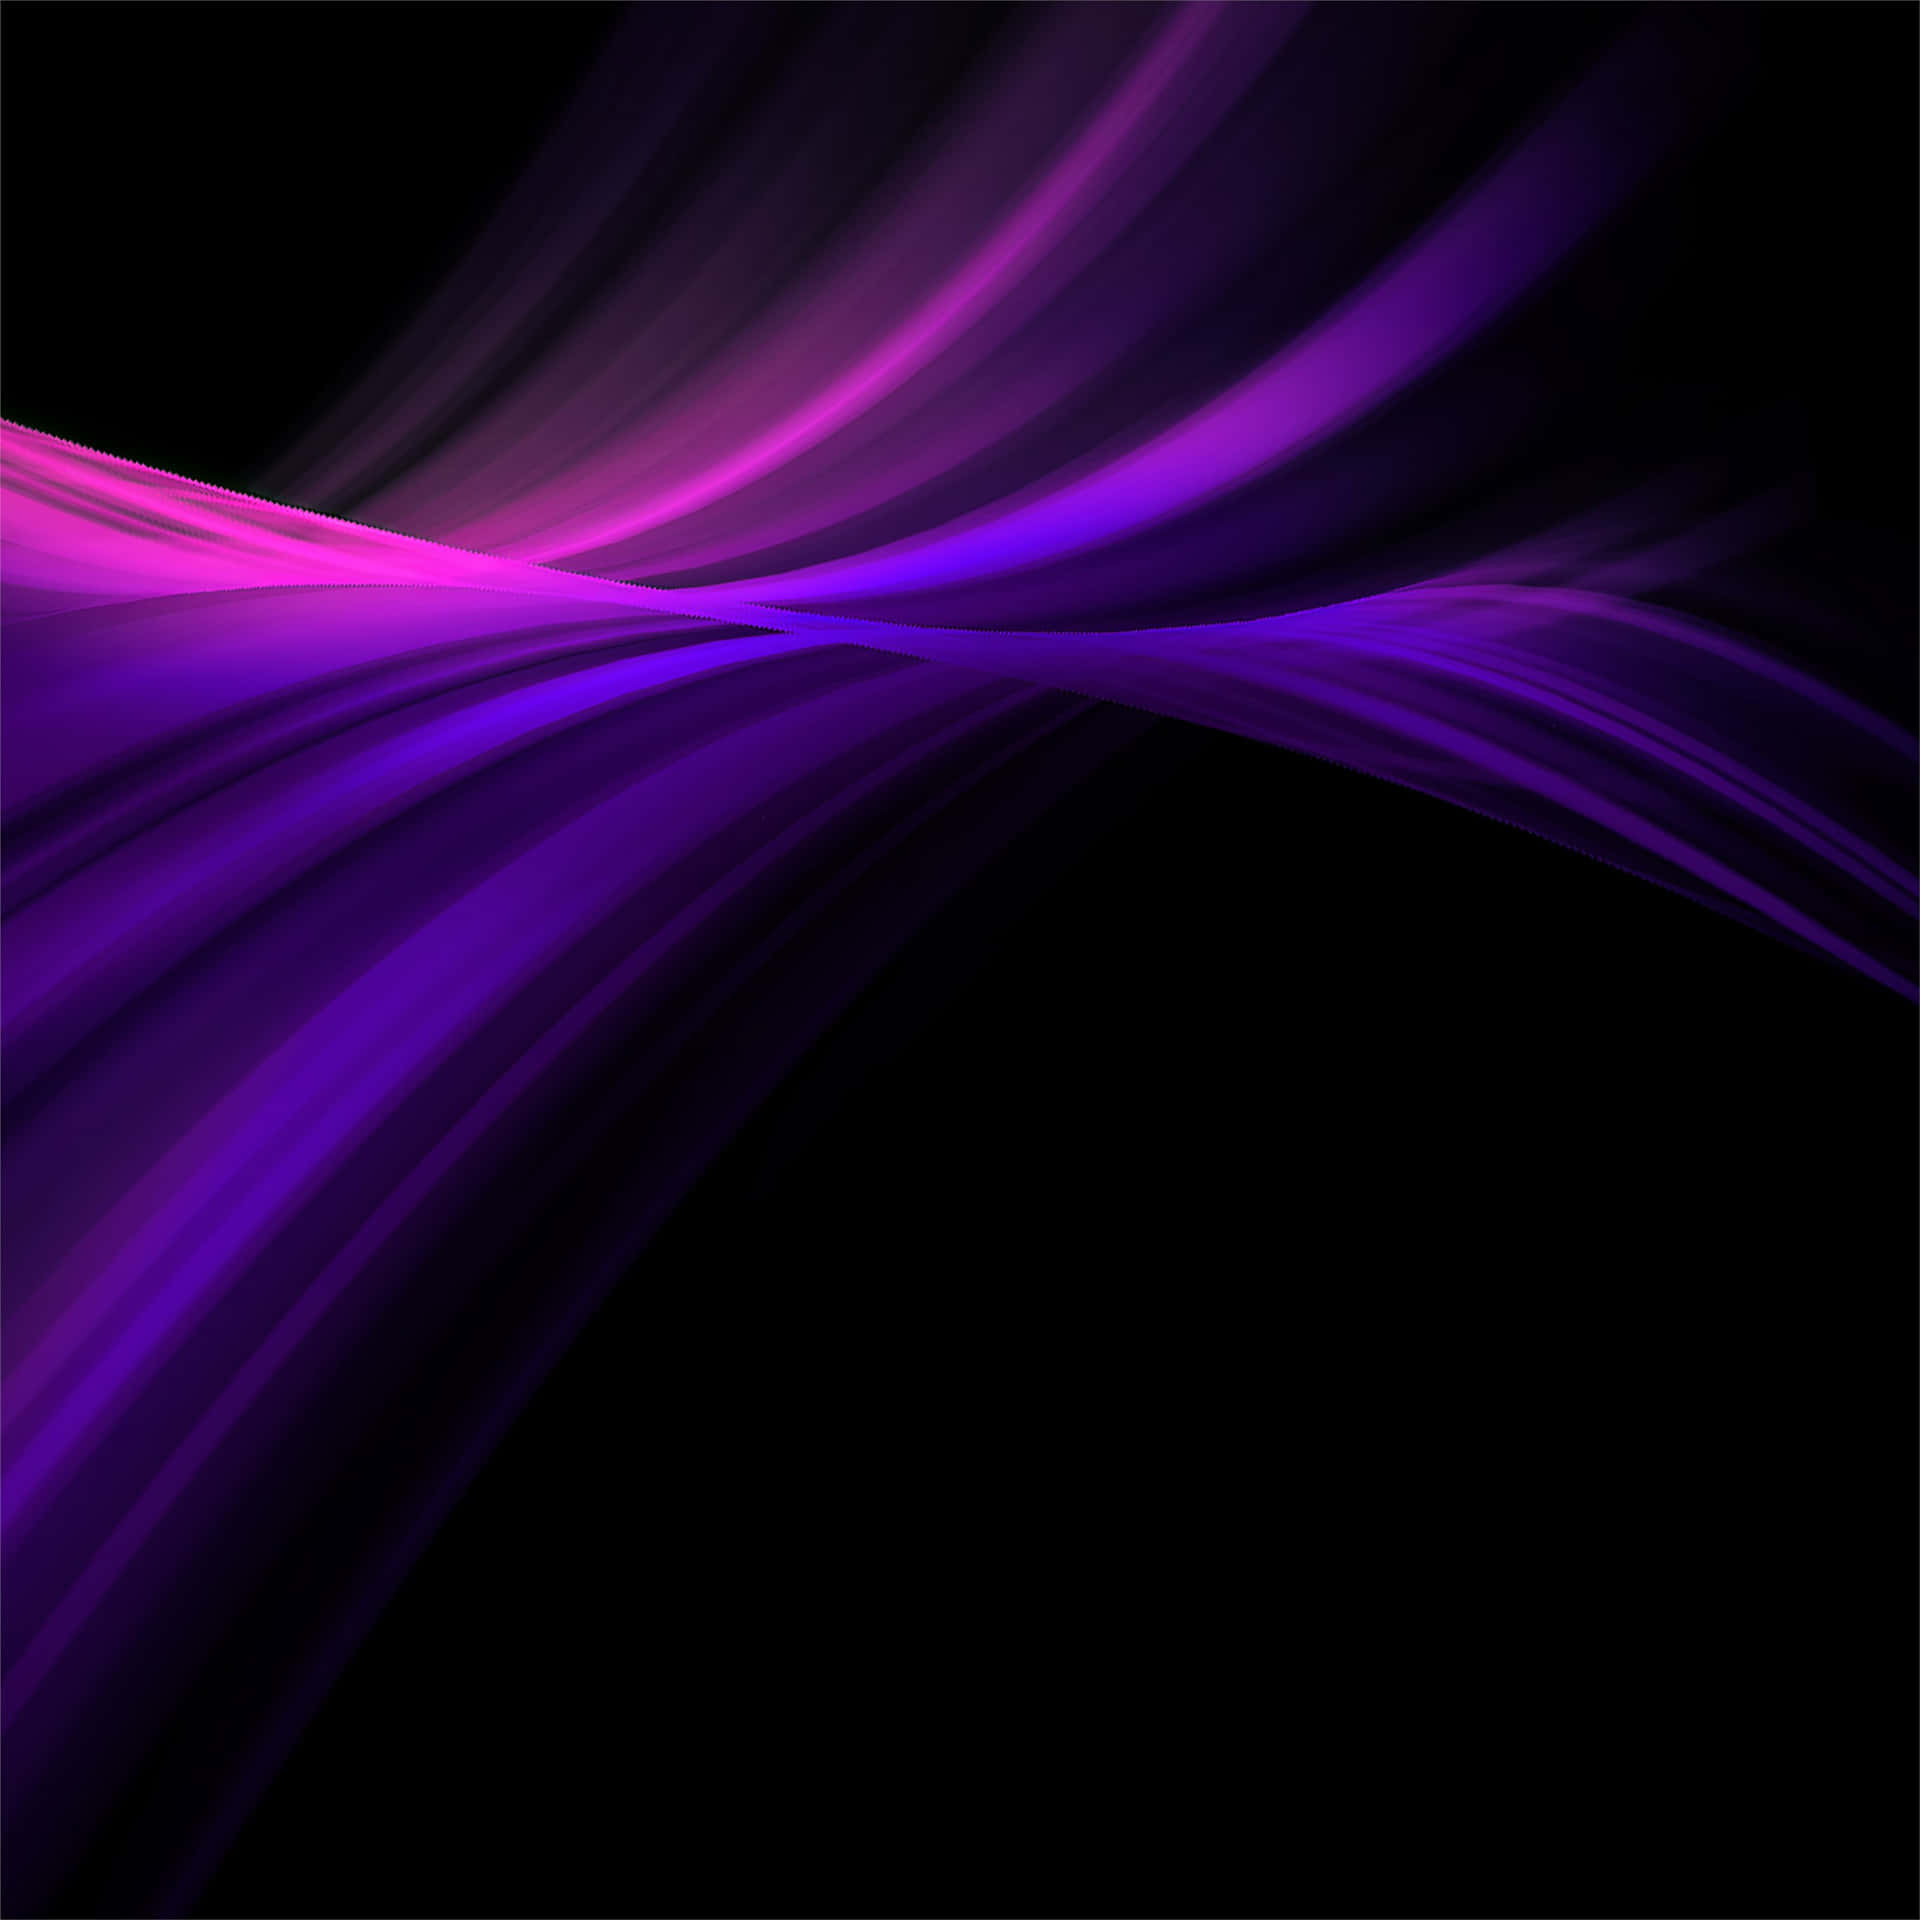 "Abstract Art Wrapped in Shades of Purple" Wallpaper